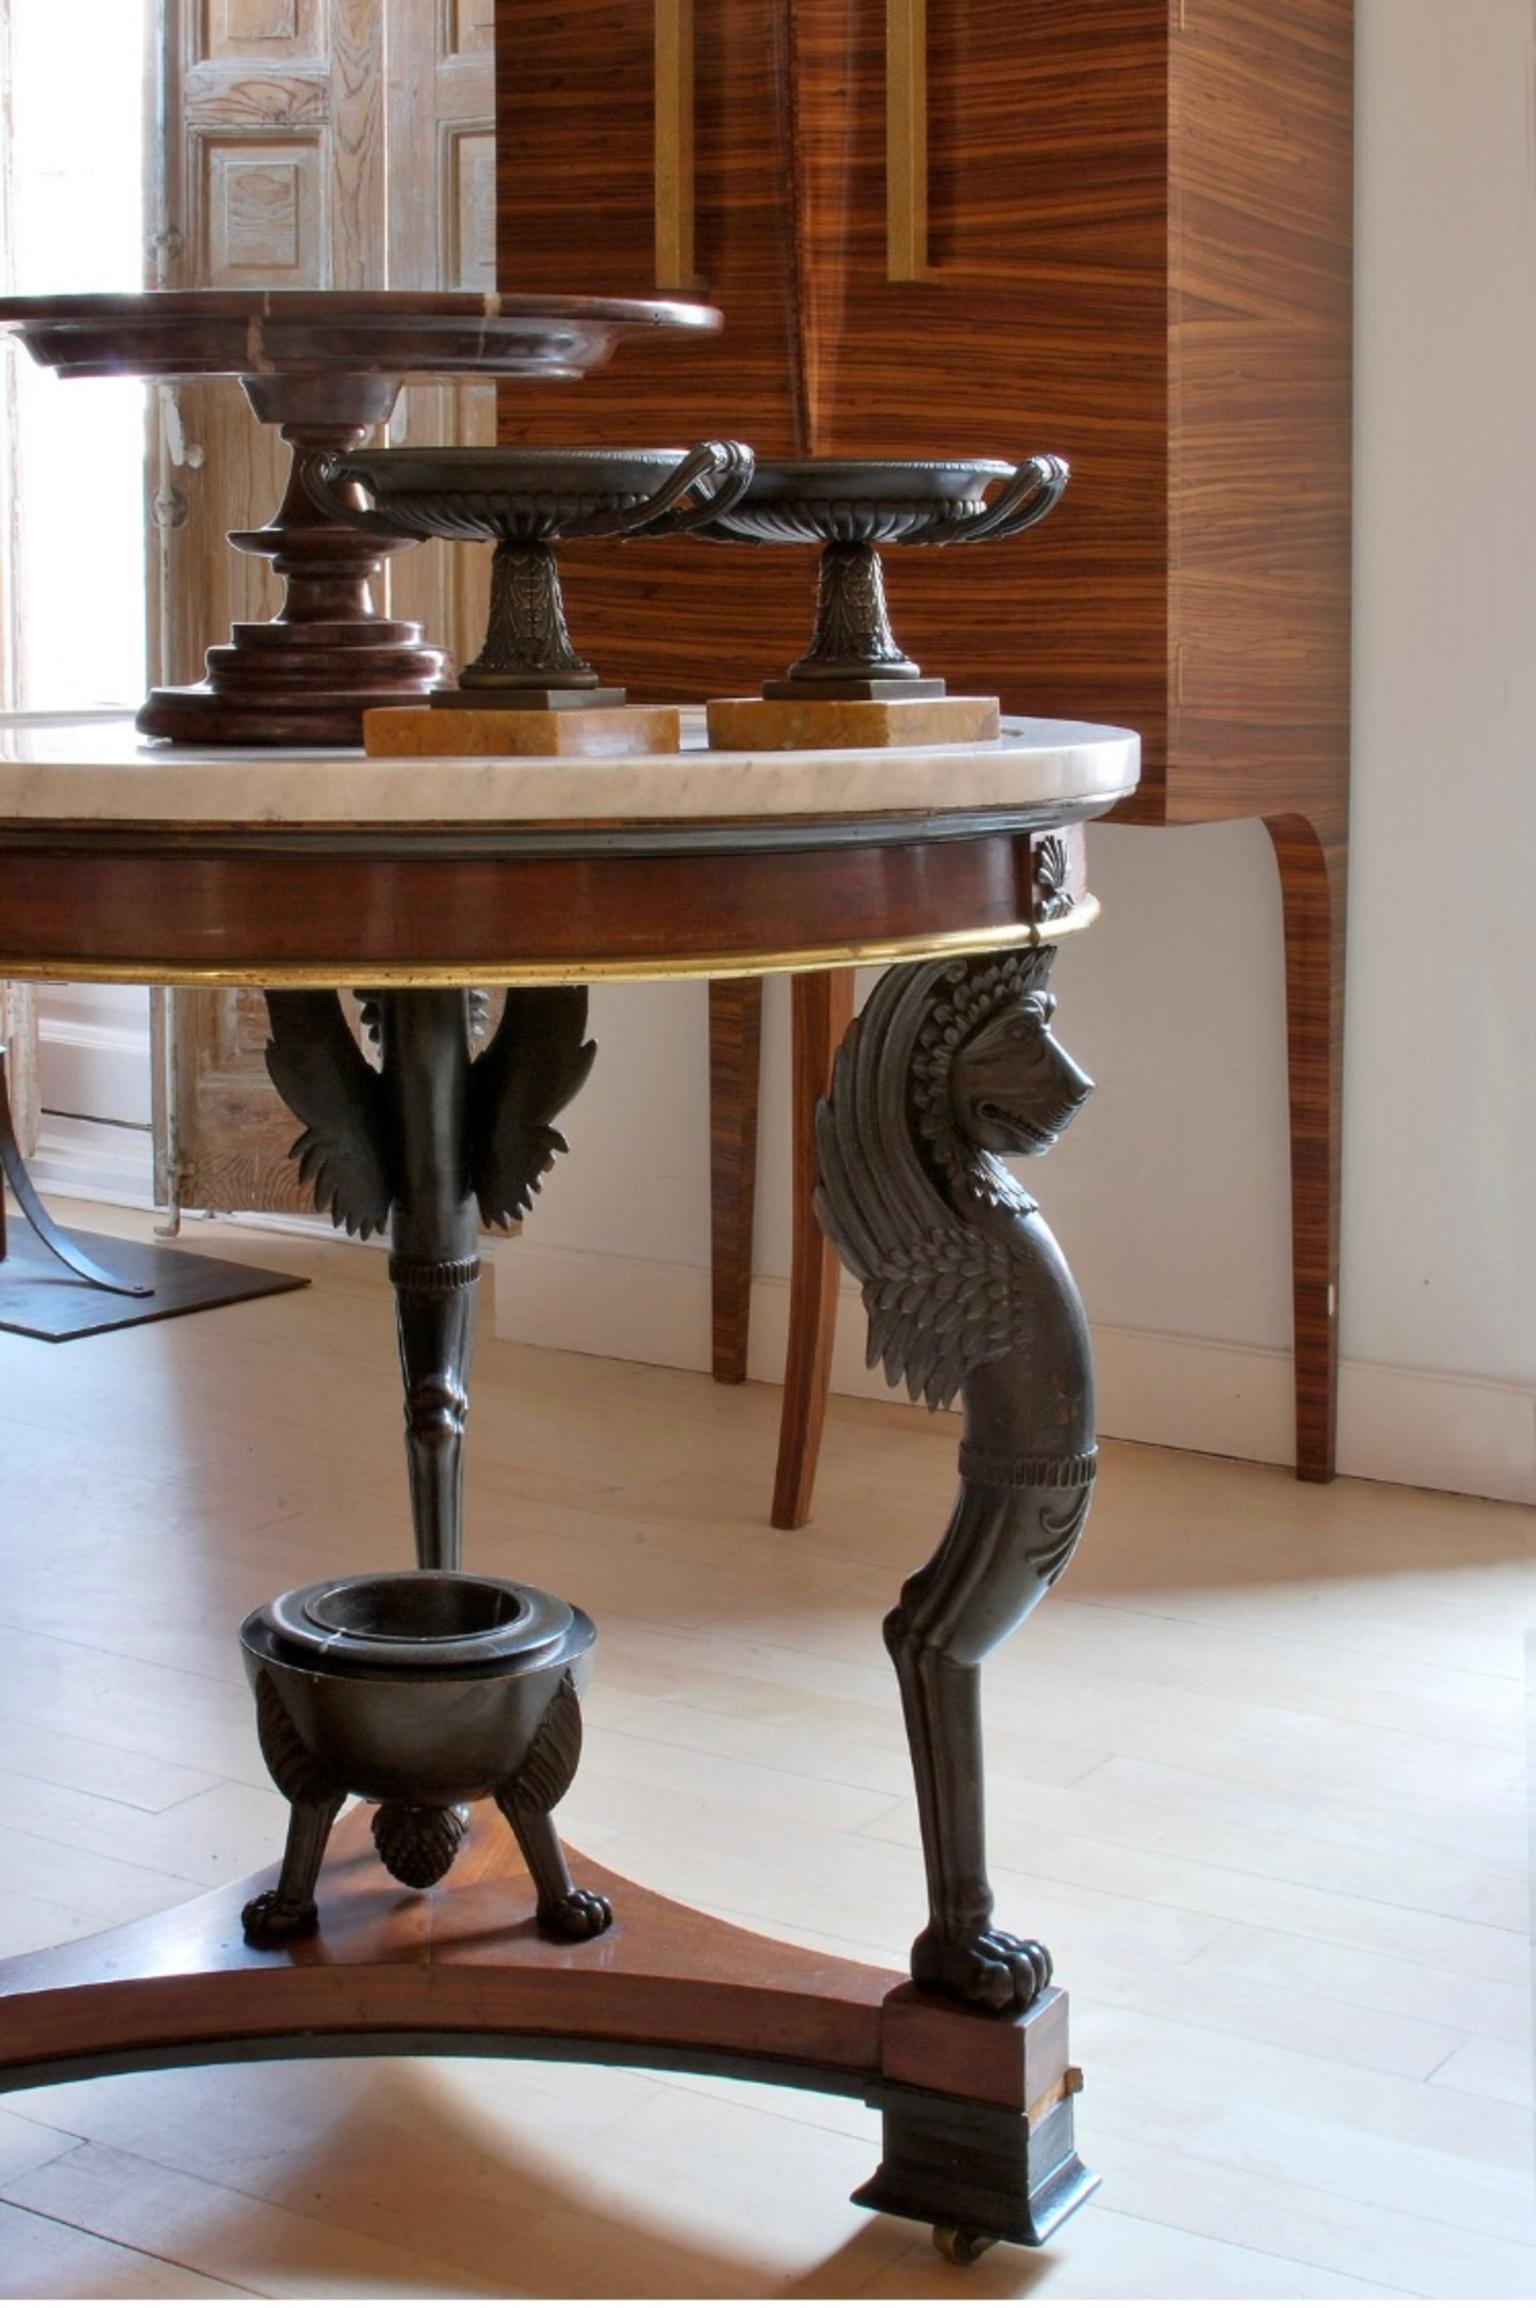 Gueridón  table with marble top from the Empire period, Swedish work from the early 19th century, in cherry wood and ebonized wood, the top is supported on winged lions and a triangular base with a cup in the center, it is topped by wheels covered